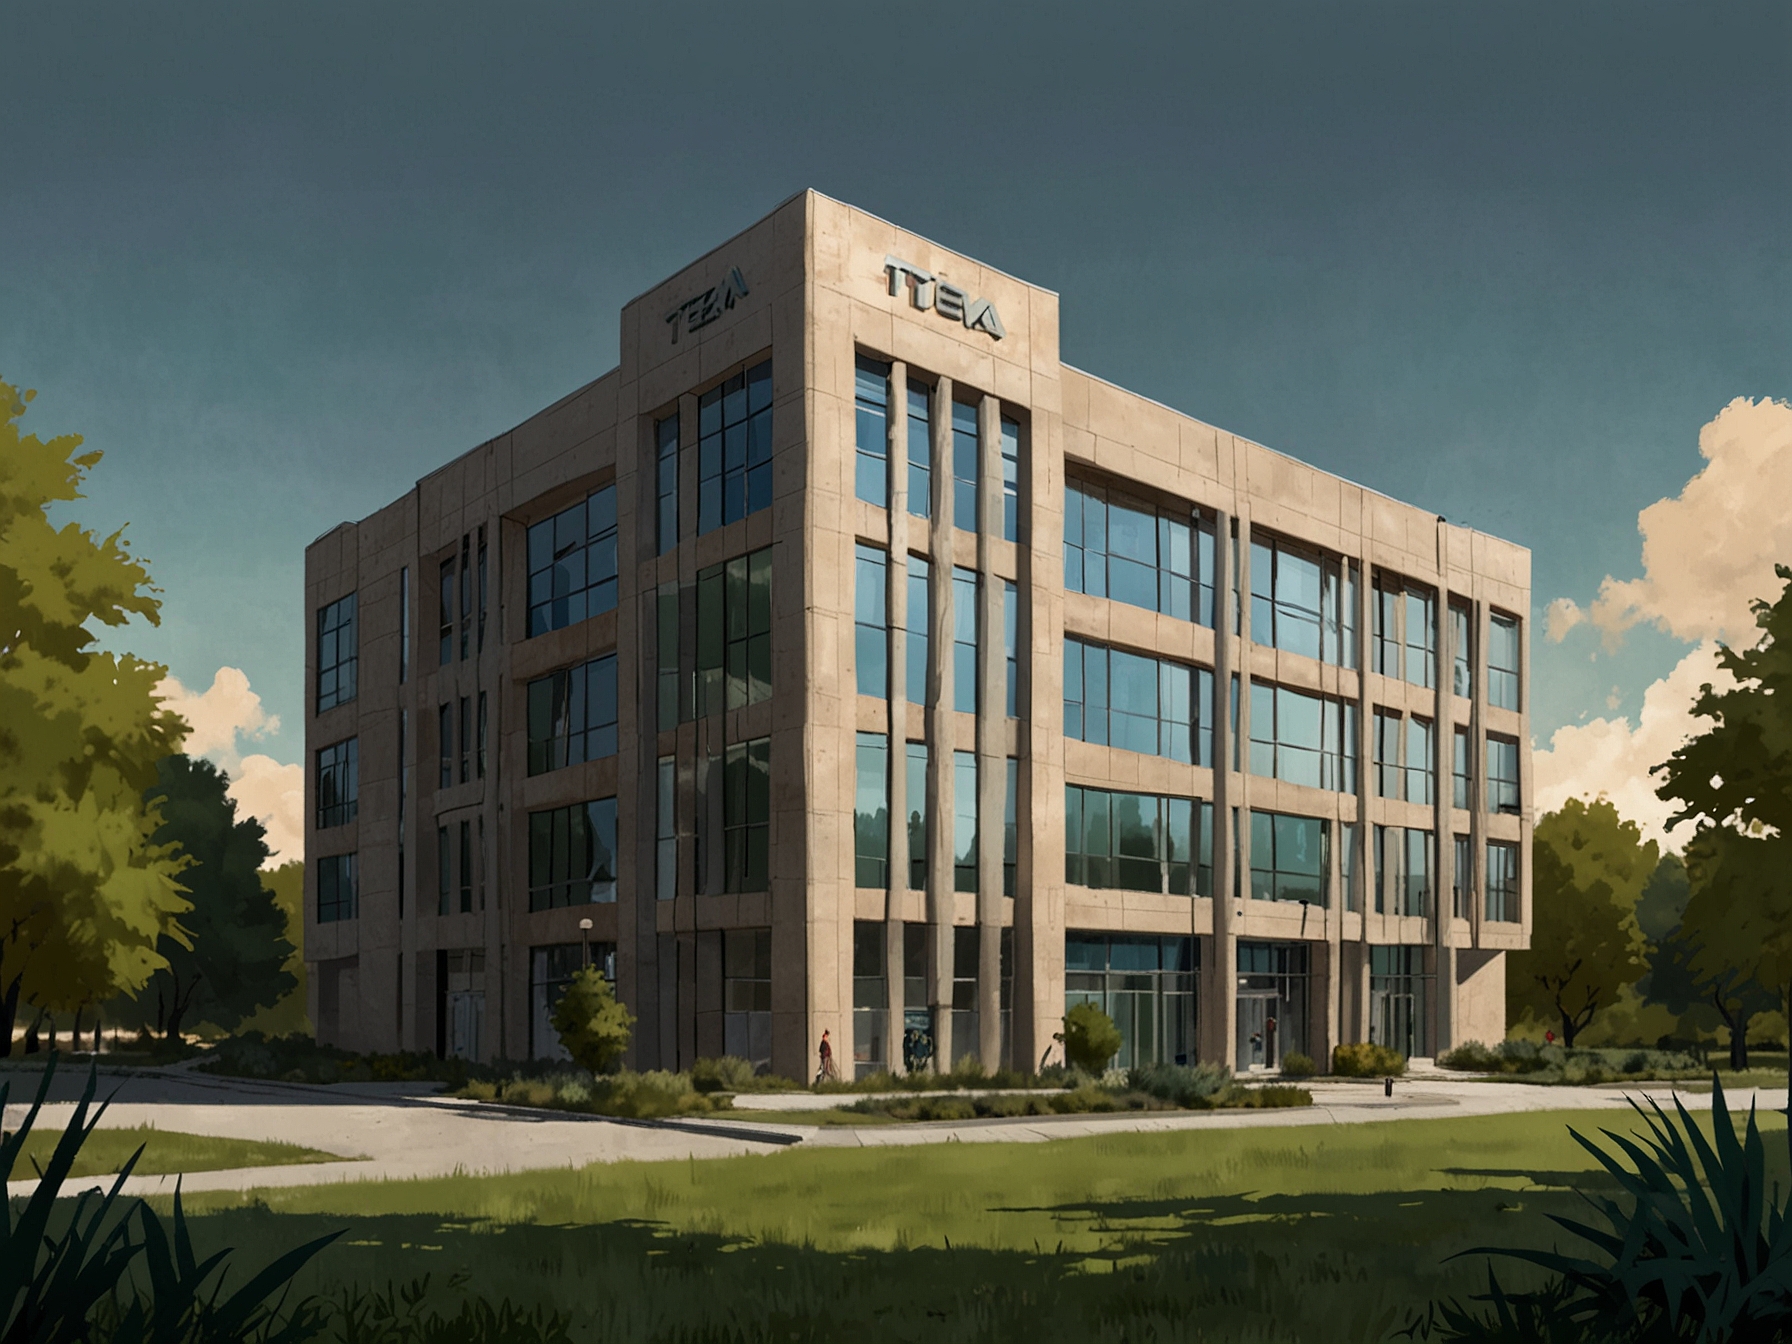 An image showing an FTC building with the Teva logo, highlighting the regulatory scrutiny over Teva's inhaler patents and the investigation into potential anti-competitive practices.